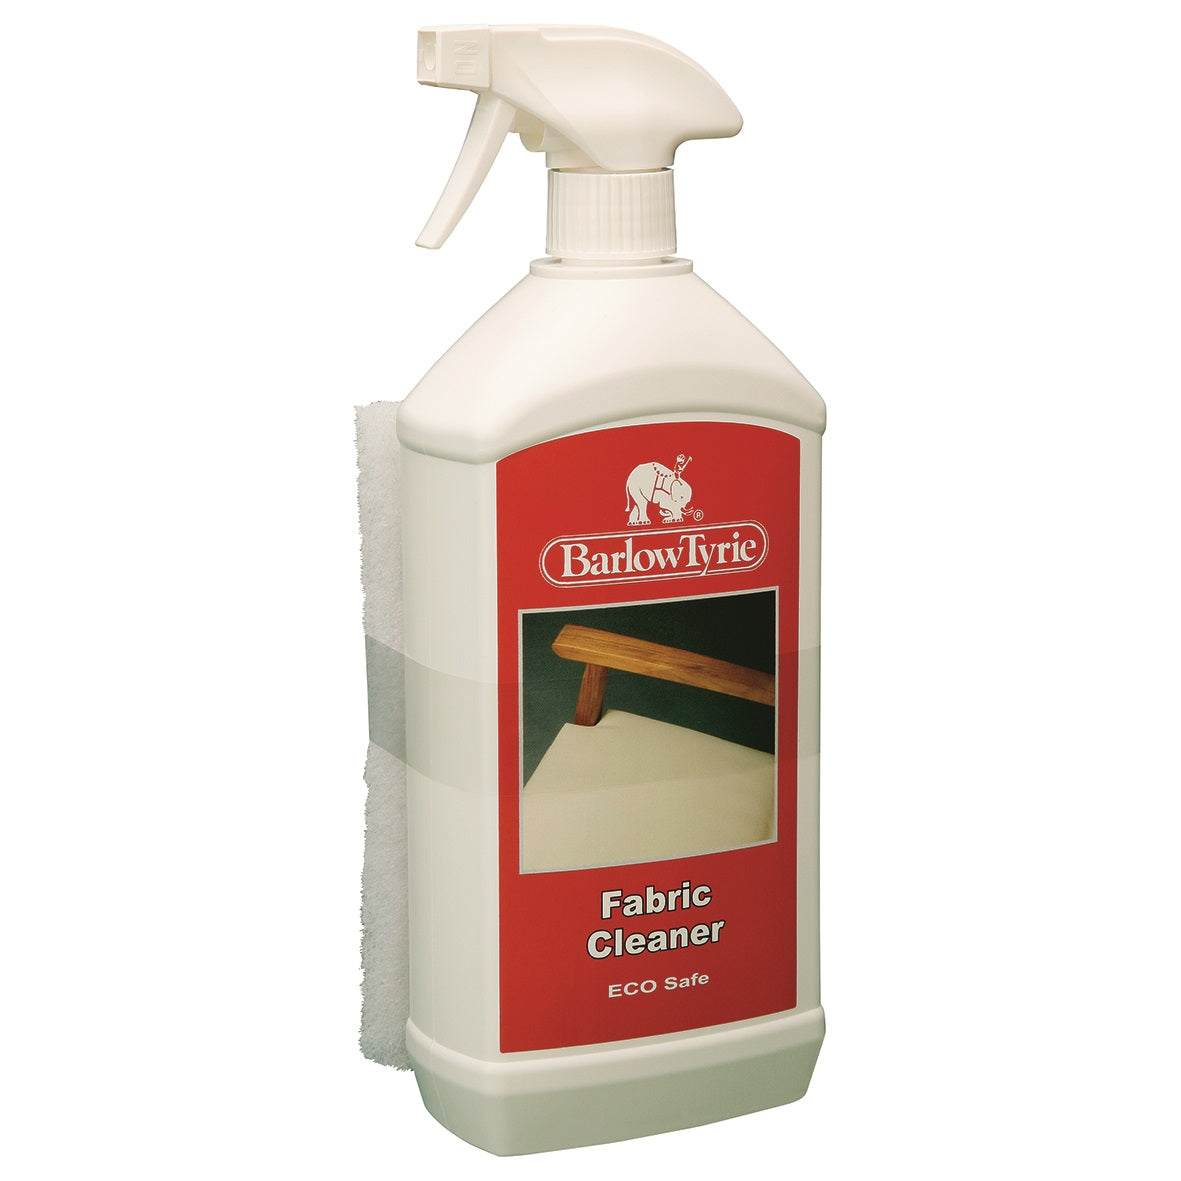 Barlow Tyrie fabric cleaner